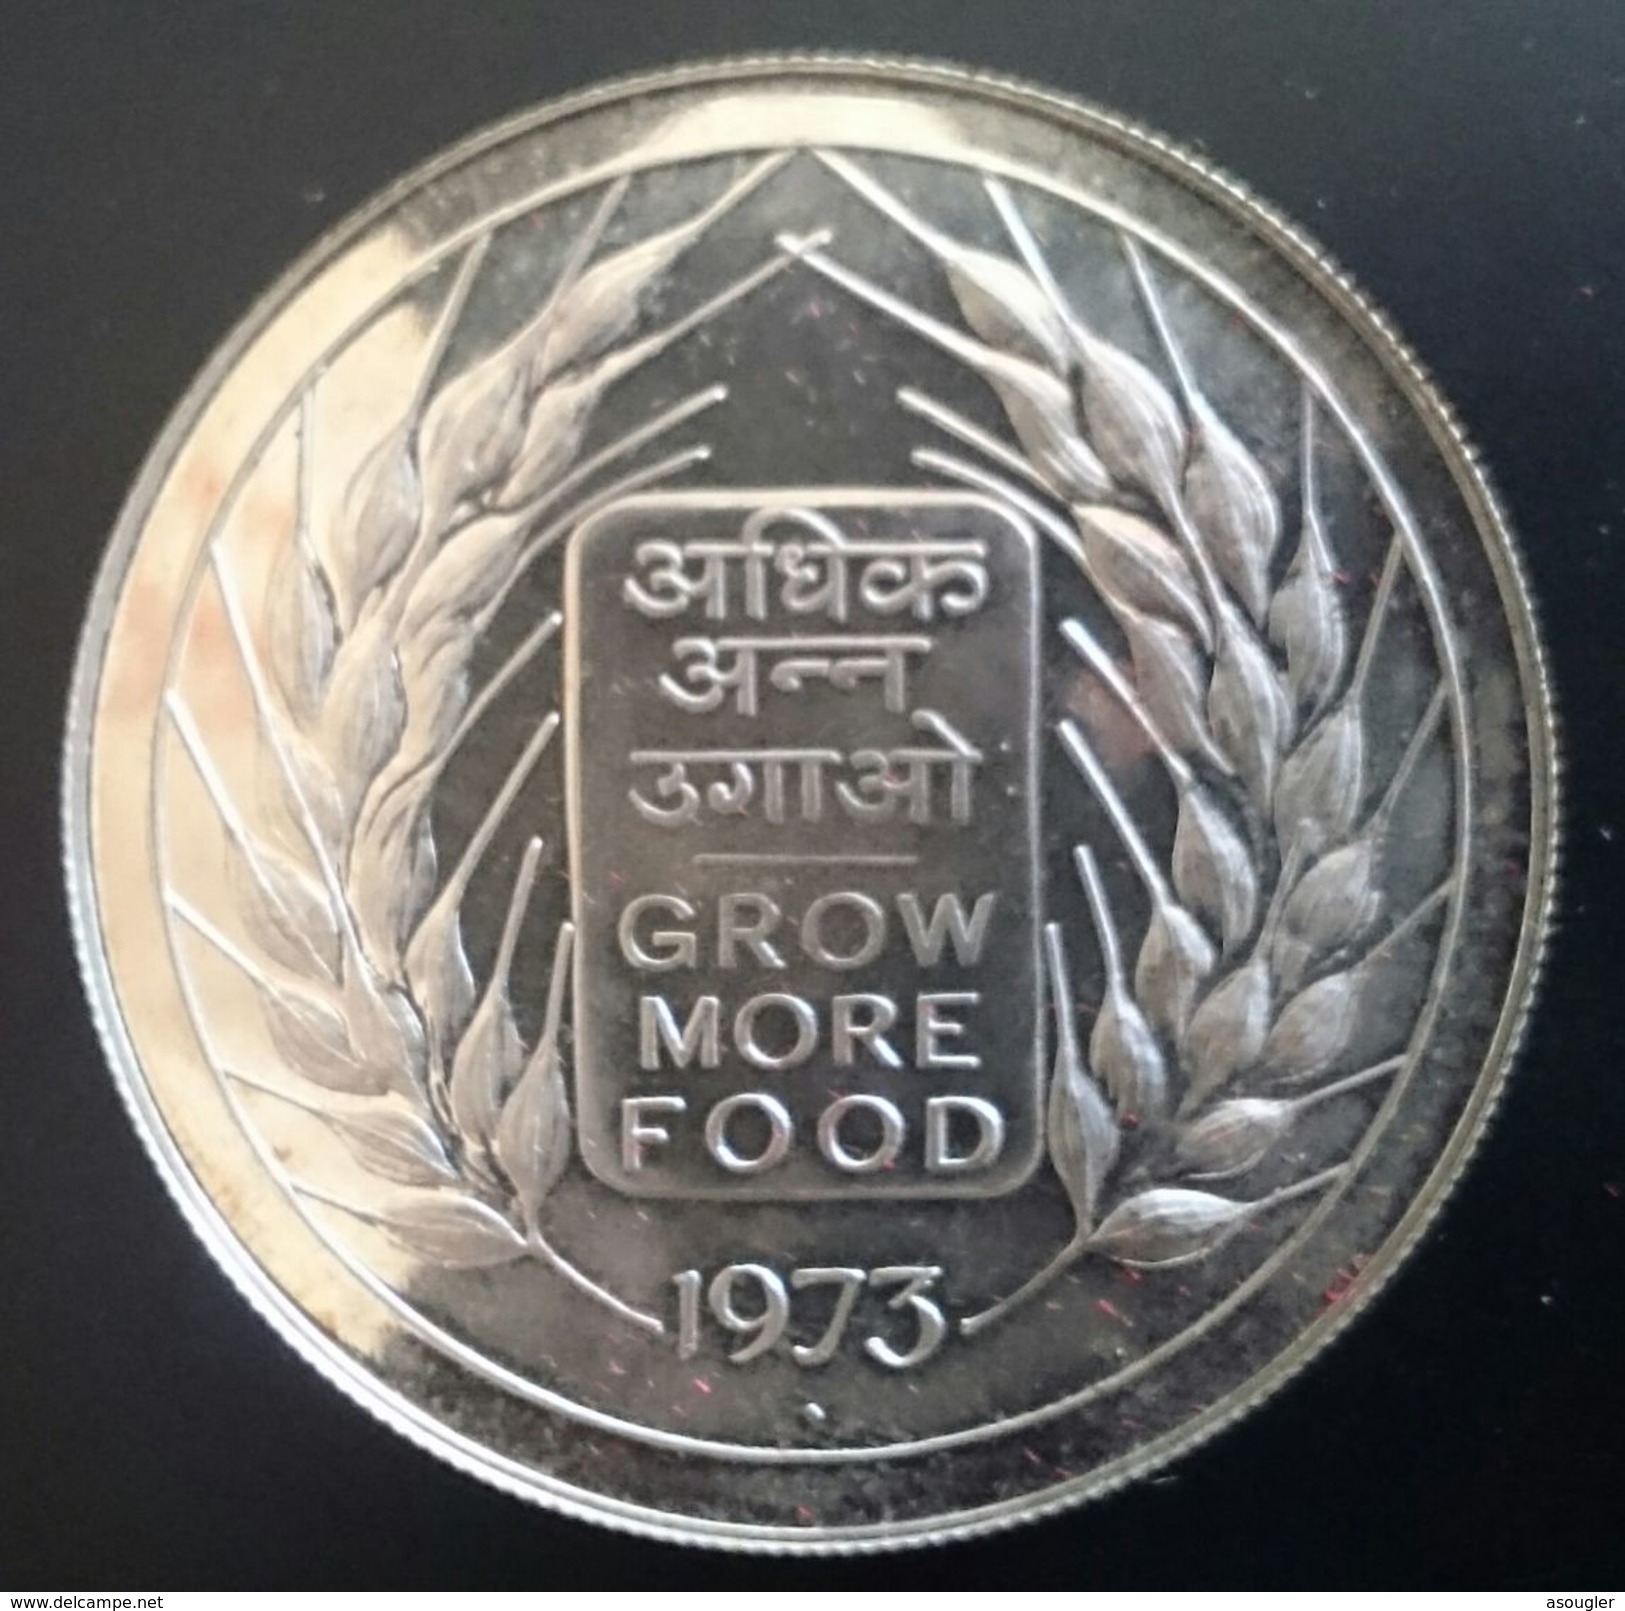 INDIA 20 RUPEES 1973 SILVER PROOF "F.A.O." Free Shipping Via Registered Air Mail - Inde